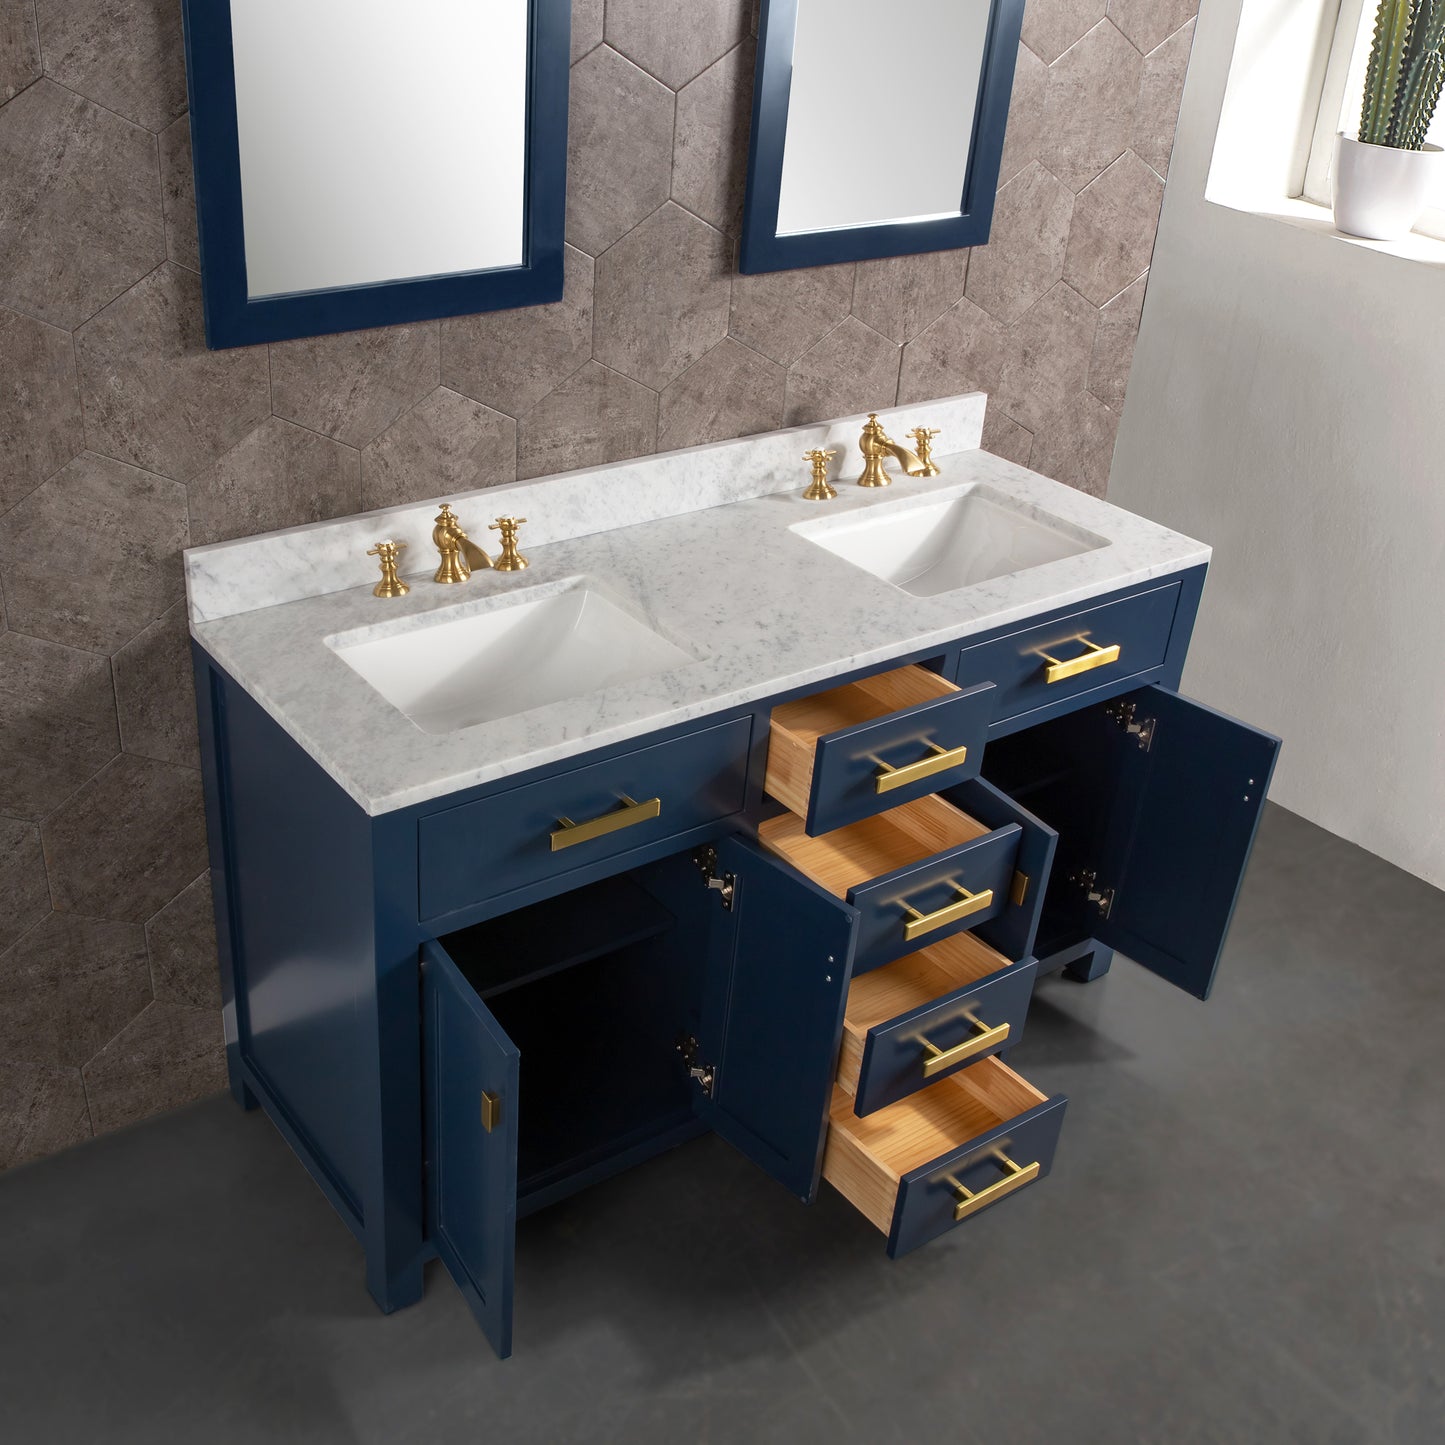 Water Creation Madison 60" Inch Double Sink Carrara White Marble Vanity In Monarch Blue with Lavatory Faucet - Luxe Bathroom Vanities